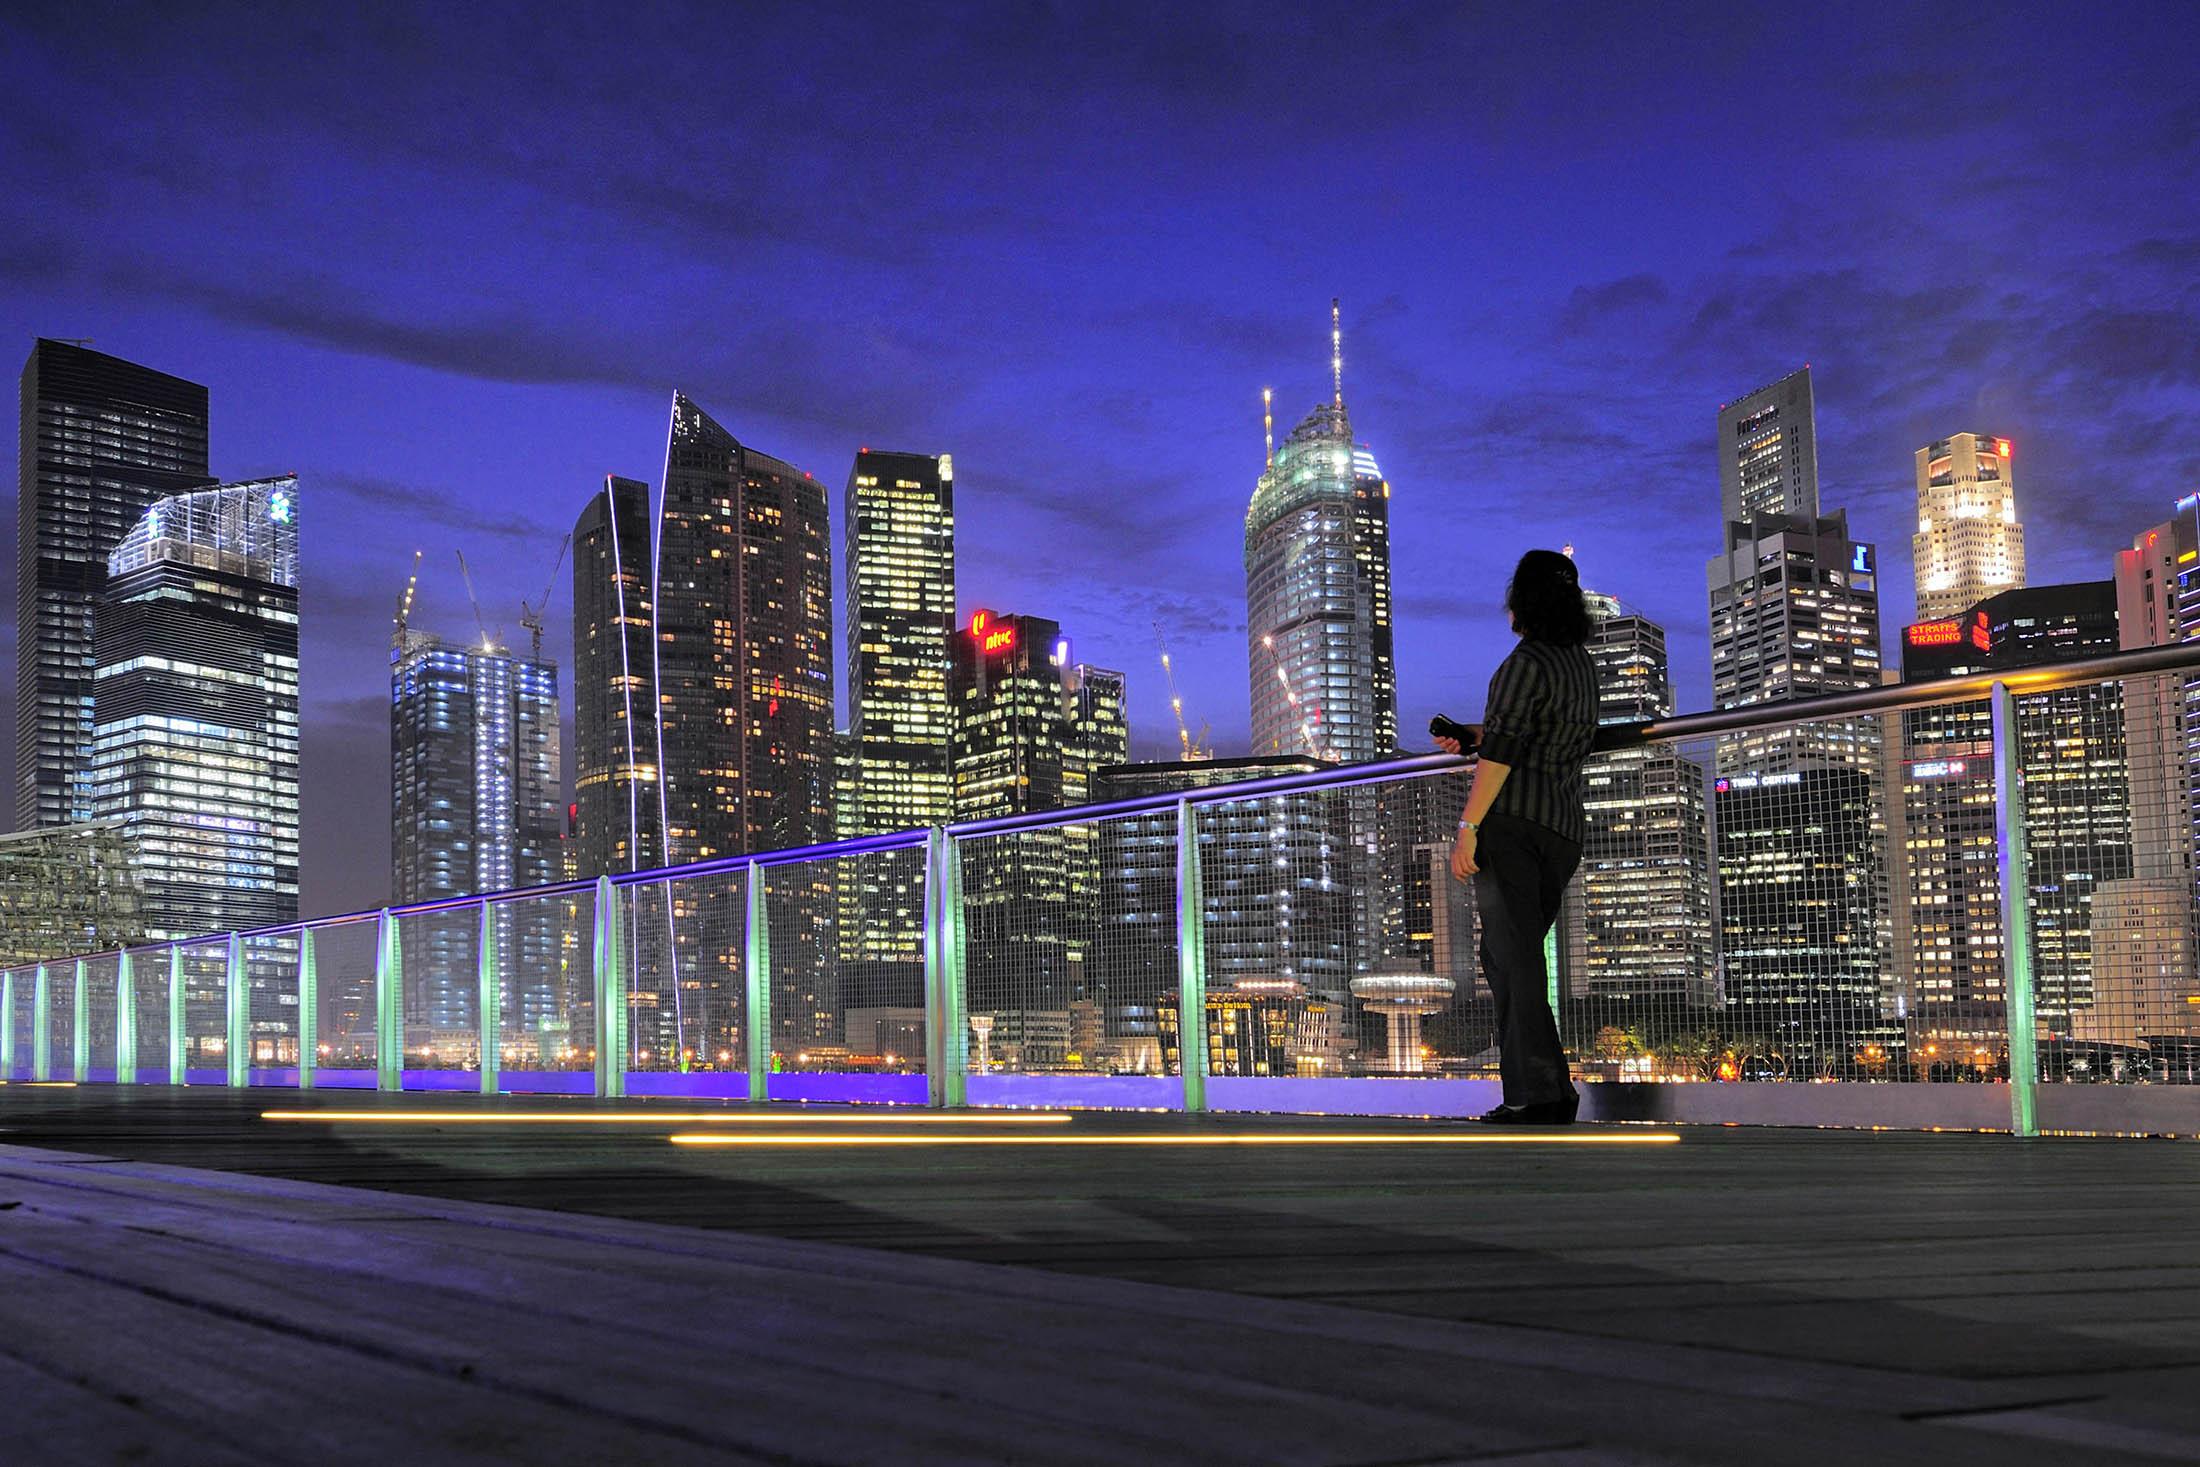 A woman on the waterfront boardwalk of the Marina Bay Sands shopping mall takes in the view across of the Singapore business district skyline, on Wednesday, October 13, 2010.
